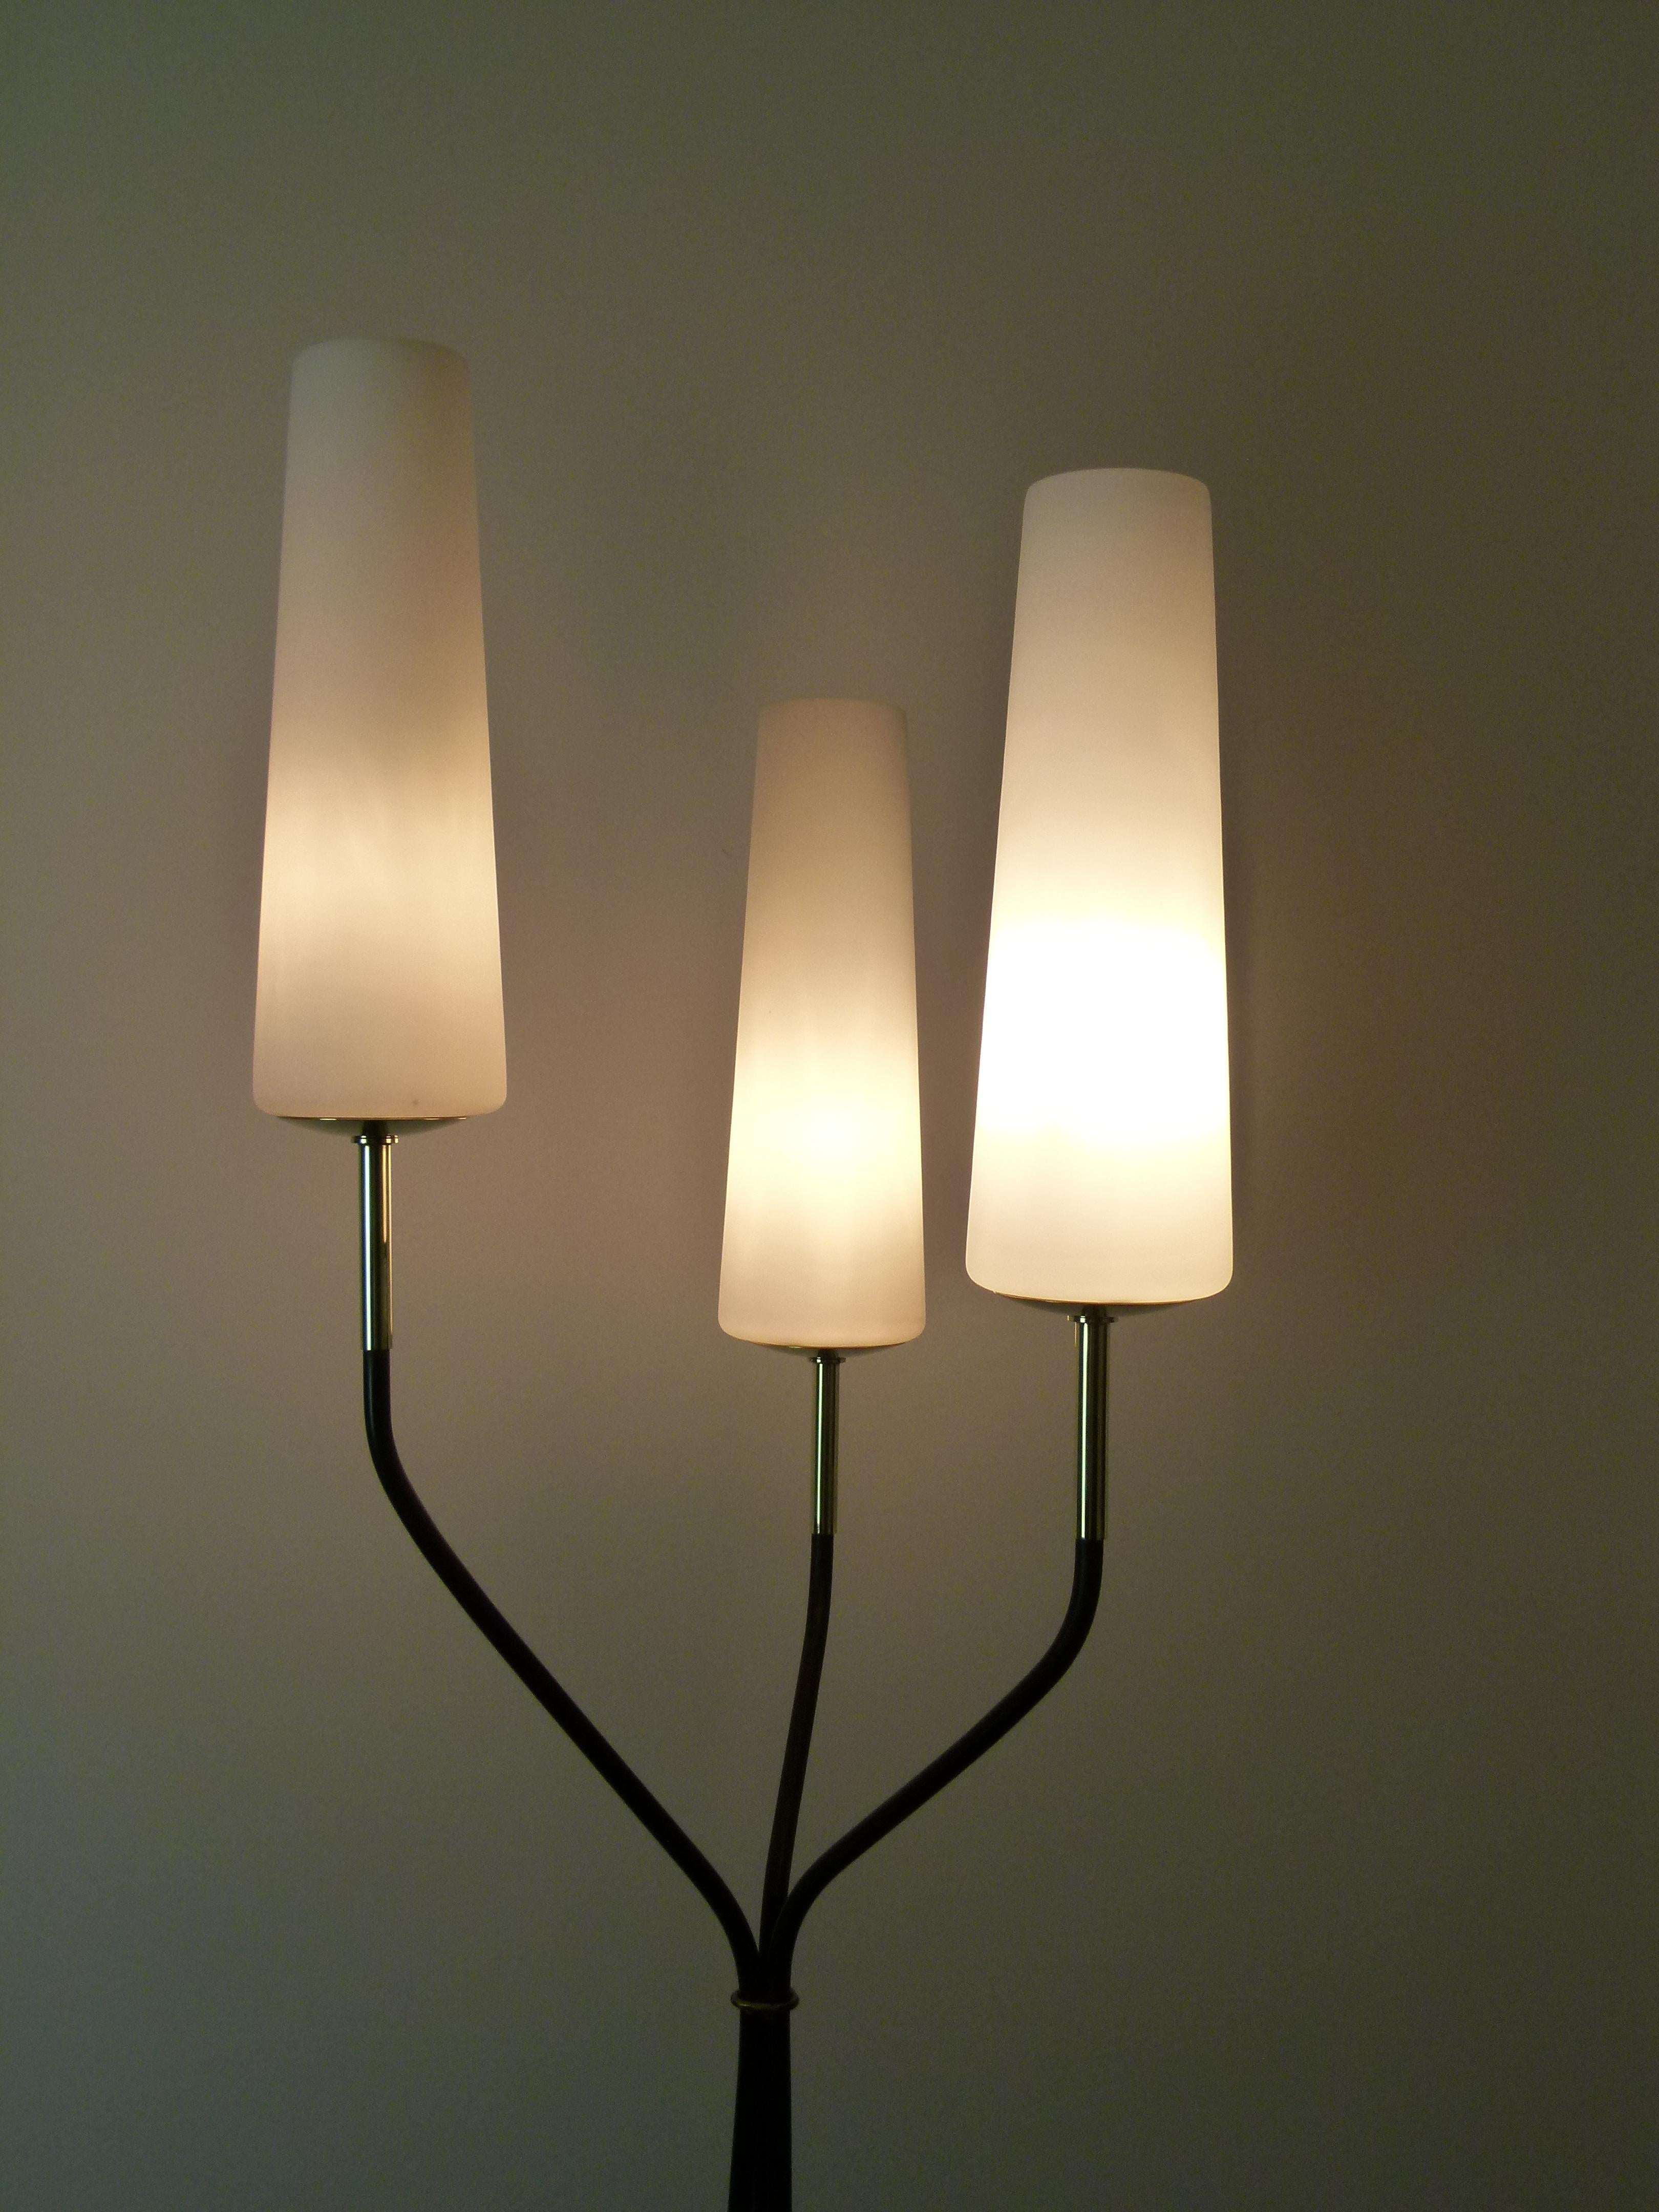 French 1950s Floor Lamp with Three Lighted Arms by Maison Lunel